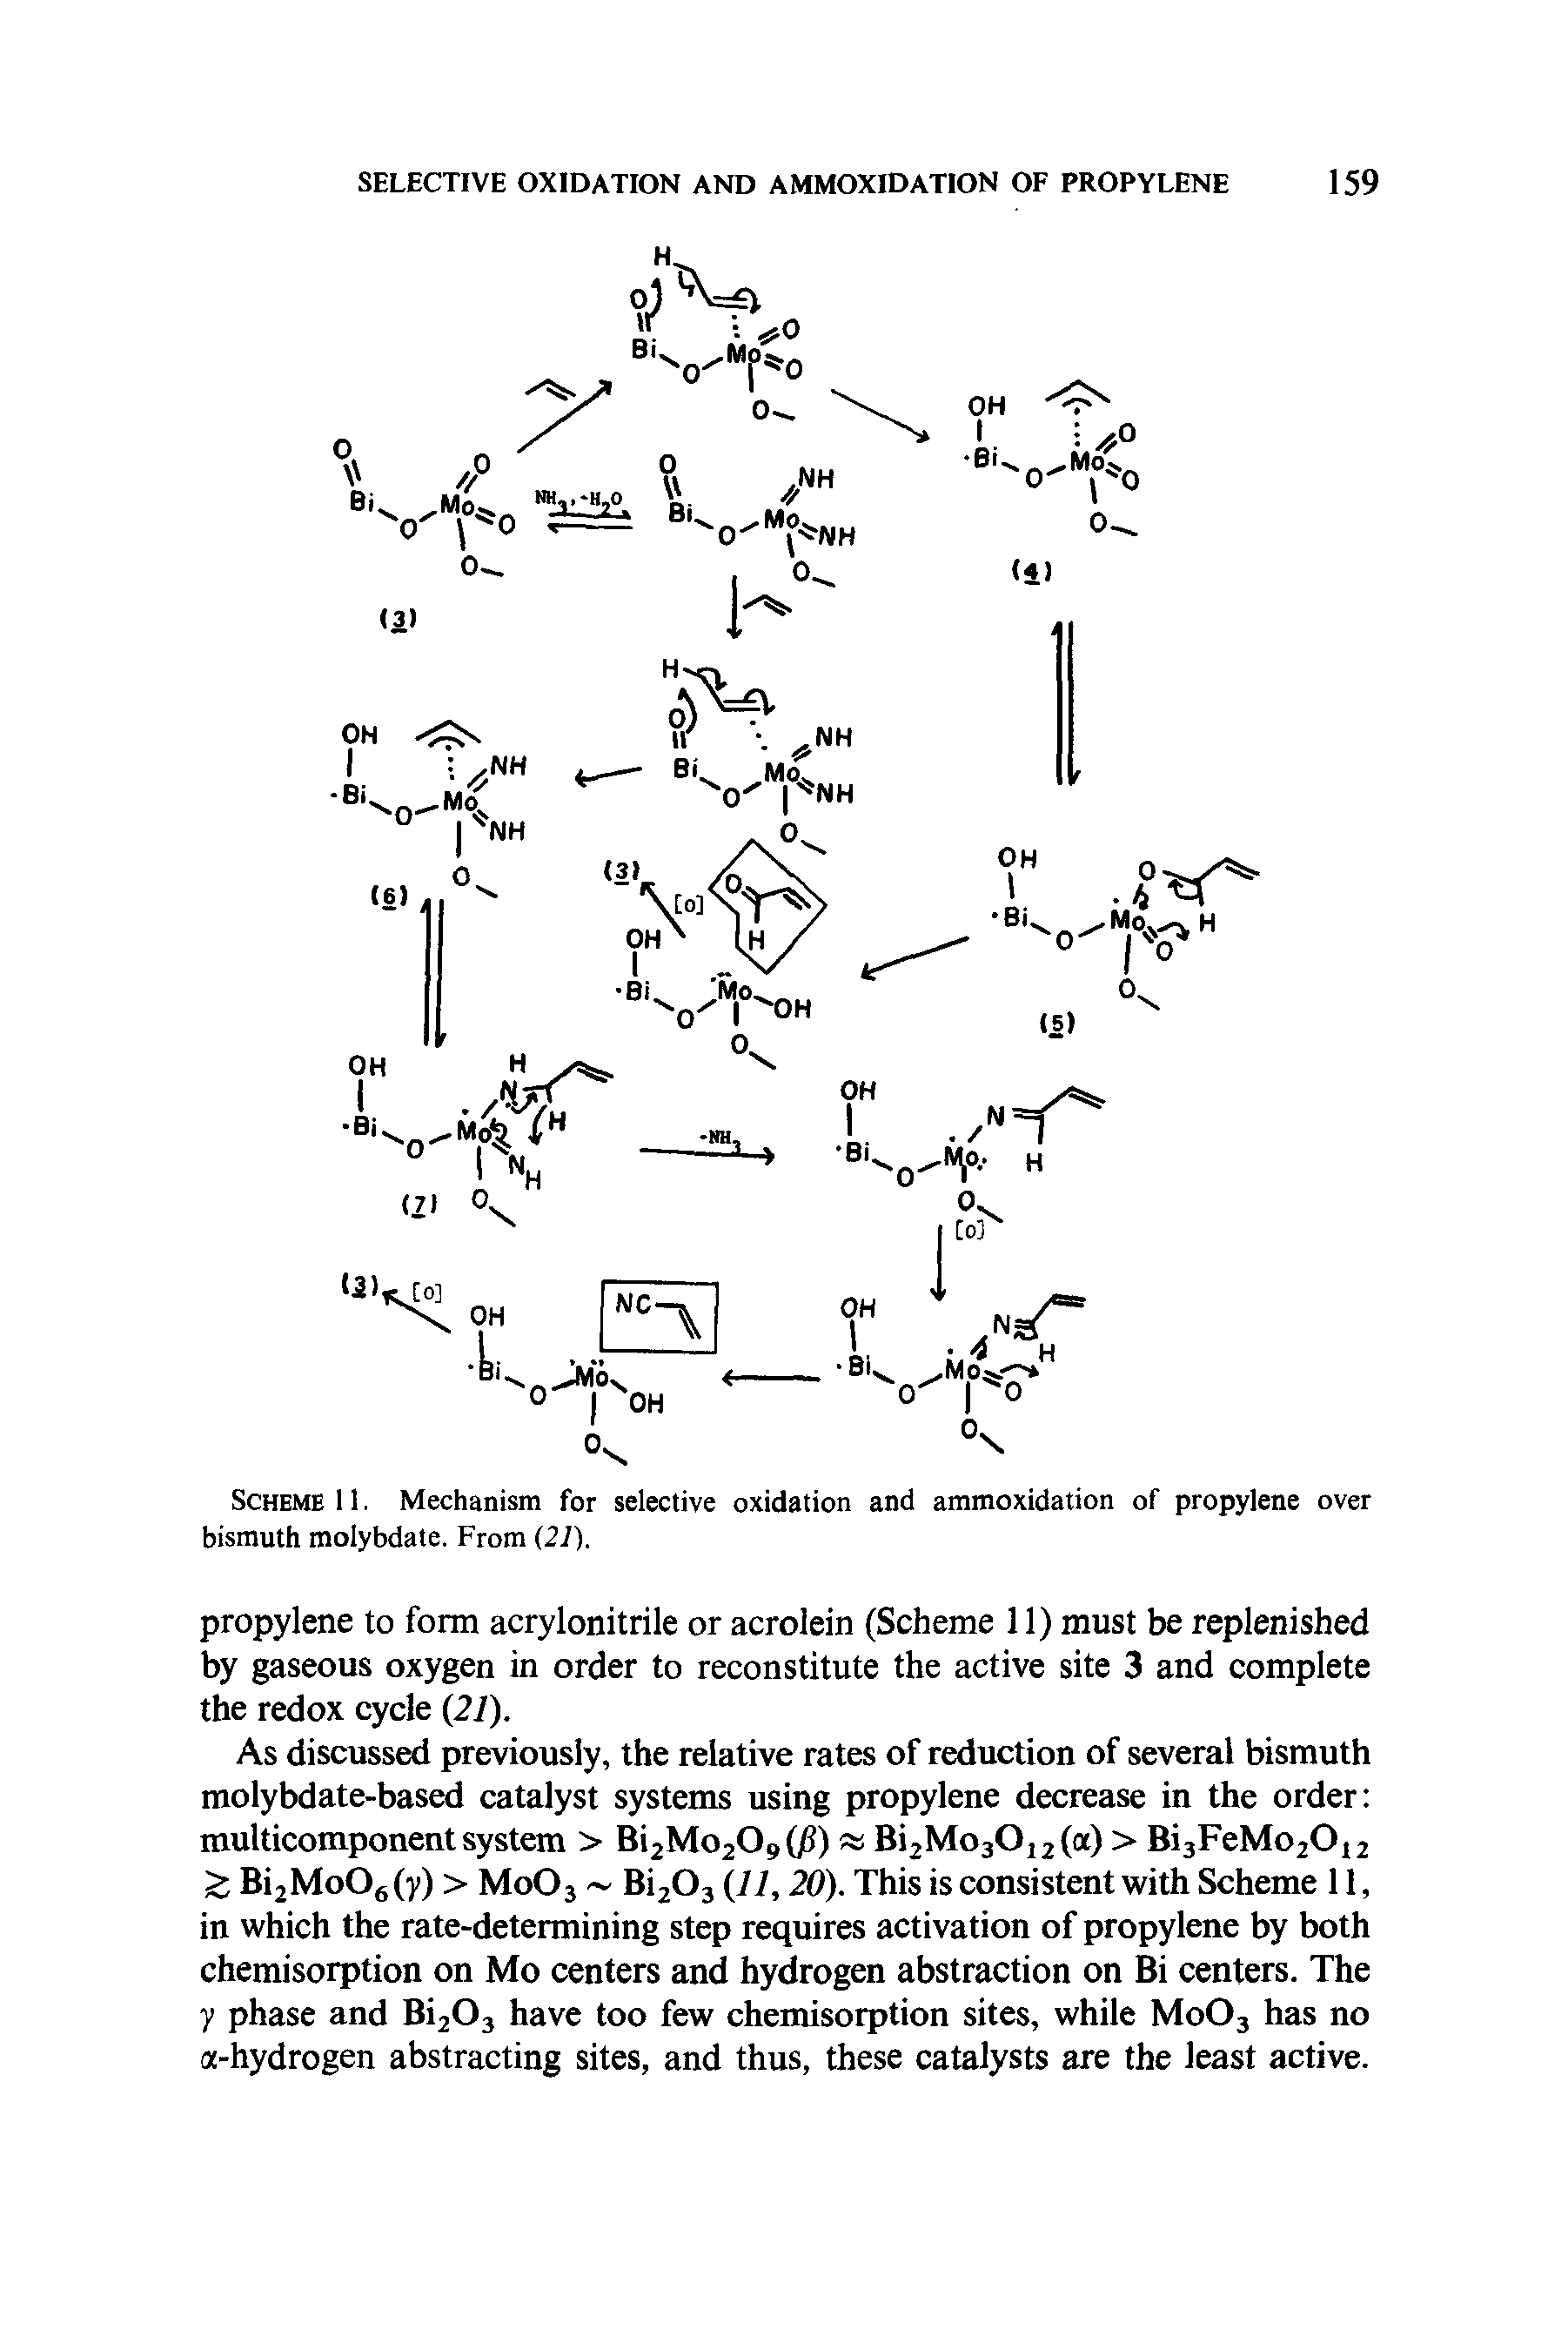 Scheme 11. Mechanism for selective oxidation and ammoxidation of propylene over bismuth molybdate. From (27).